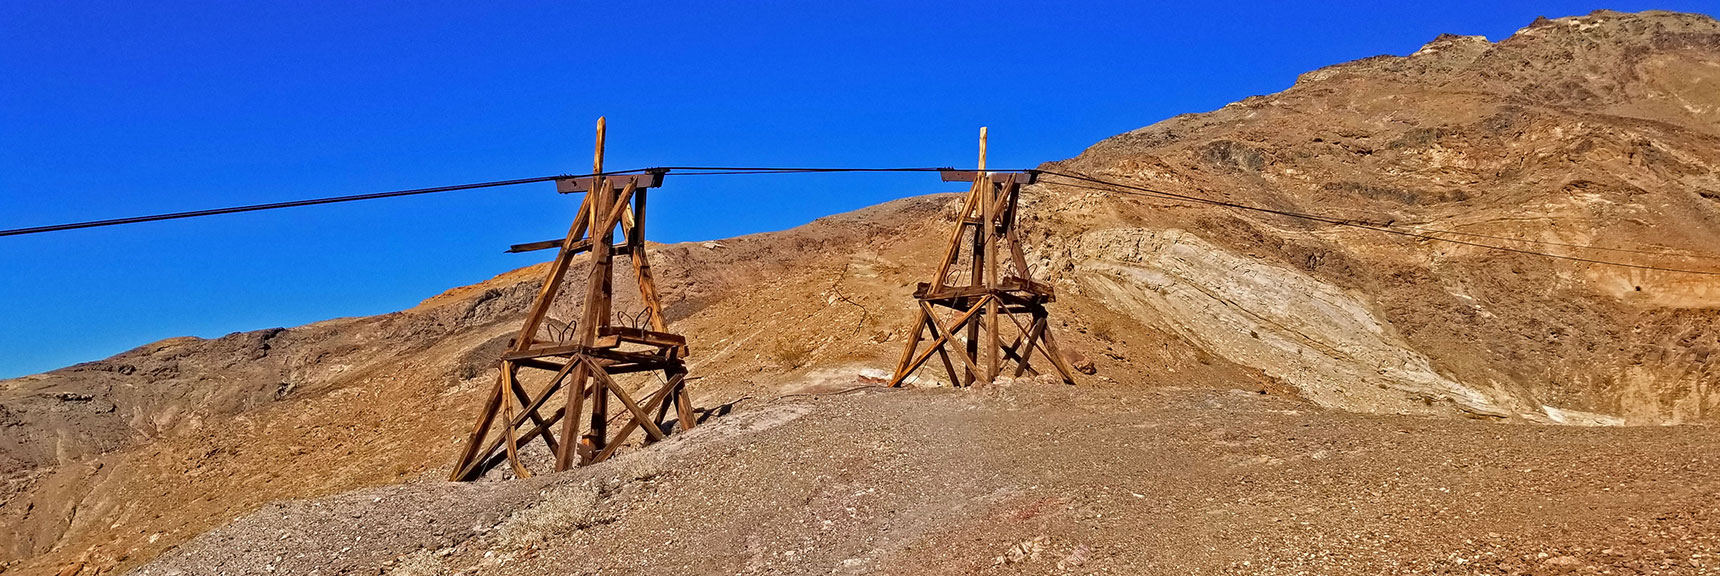 Lower Aerial Tram Way Towers While Ascending Main Trail | Keane Wonder Mine | Death Valley National Park, California